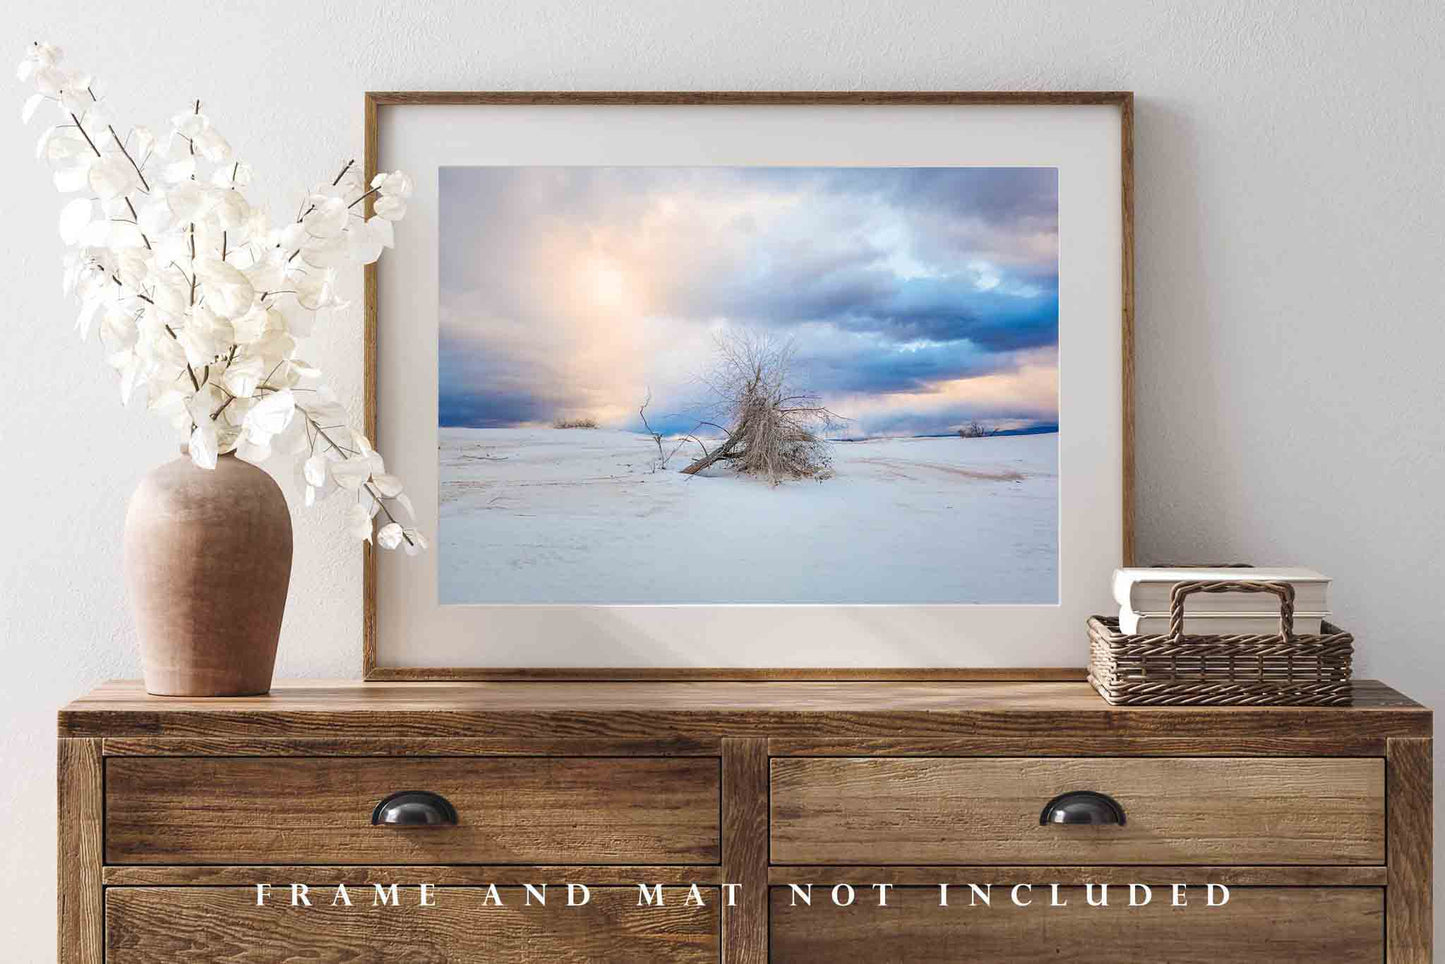 Desert Photography Print (Not Framed) Picture of Dead Tree in Sand Under Dramatic Sky at White Sands National Park New Mexico Southwest Wall Art Nature Decor